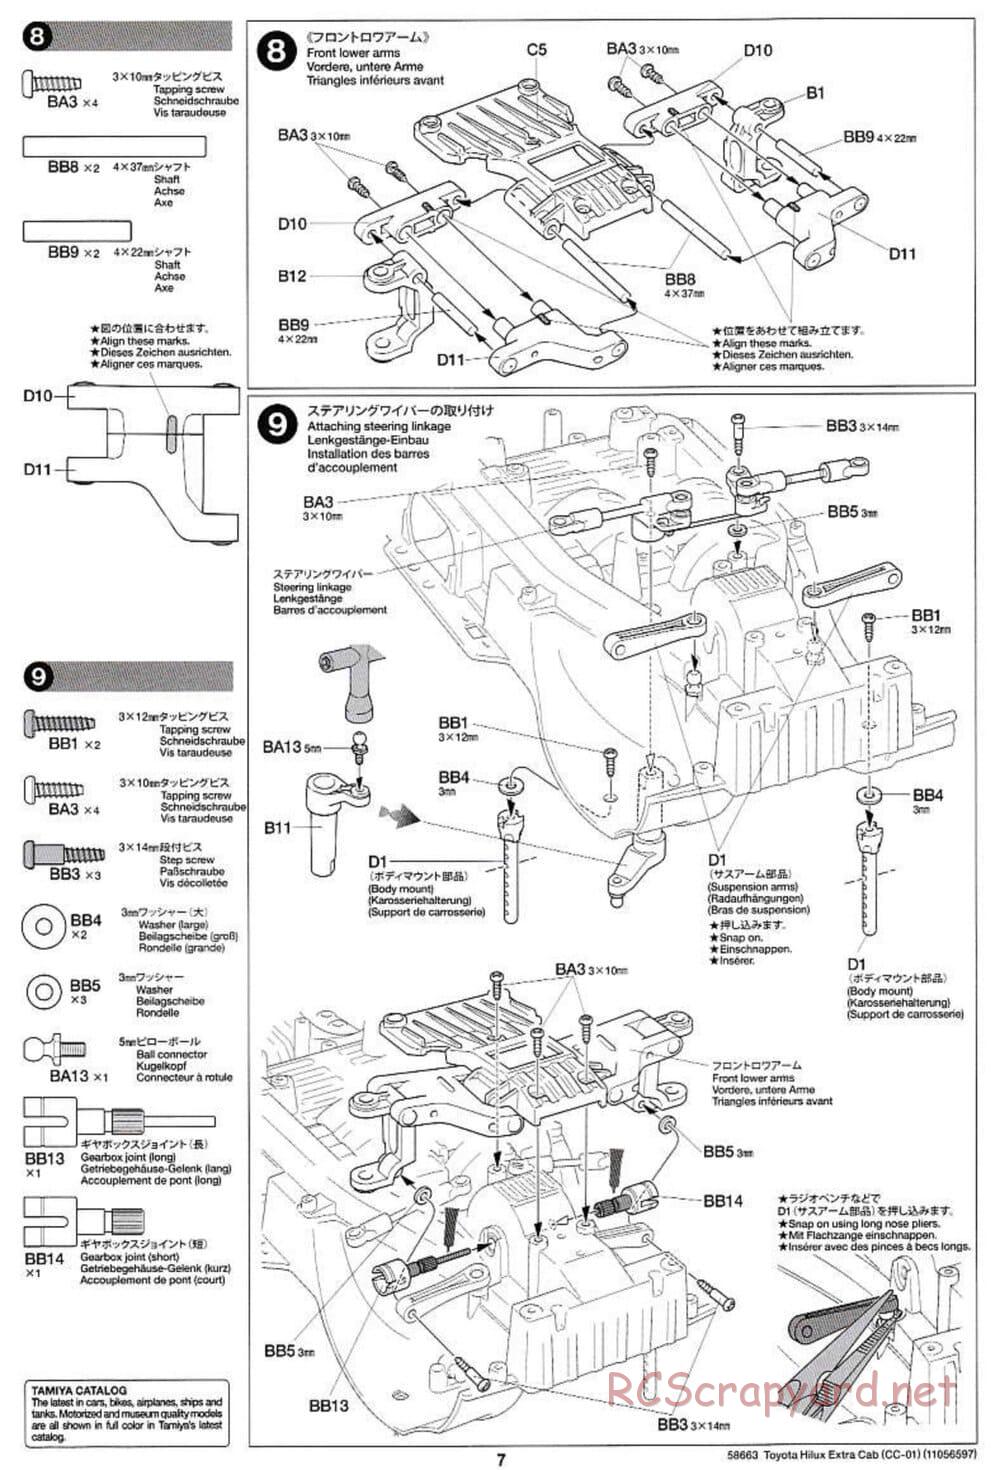 Tamiya - Toyota Hilux Extra Cab - CC-01 Chassis - Manual - Page 7